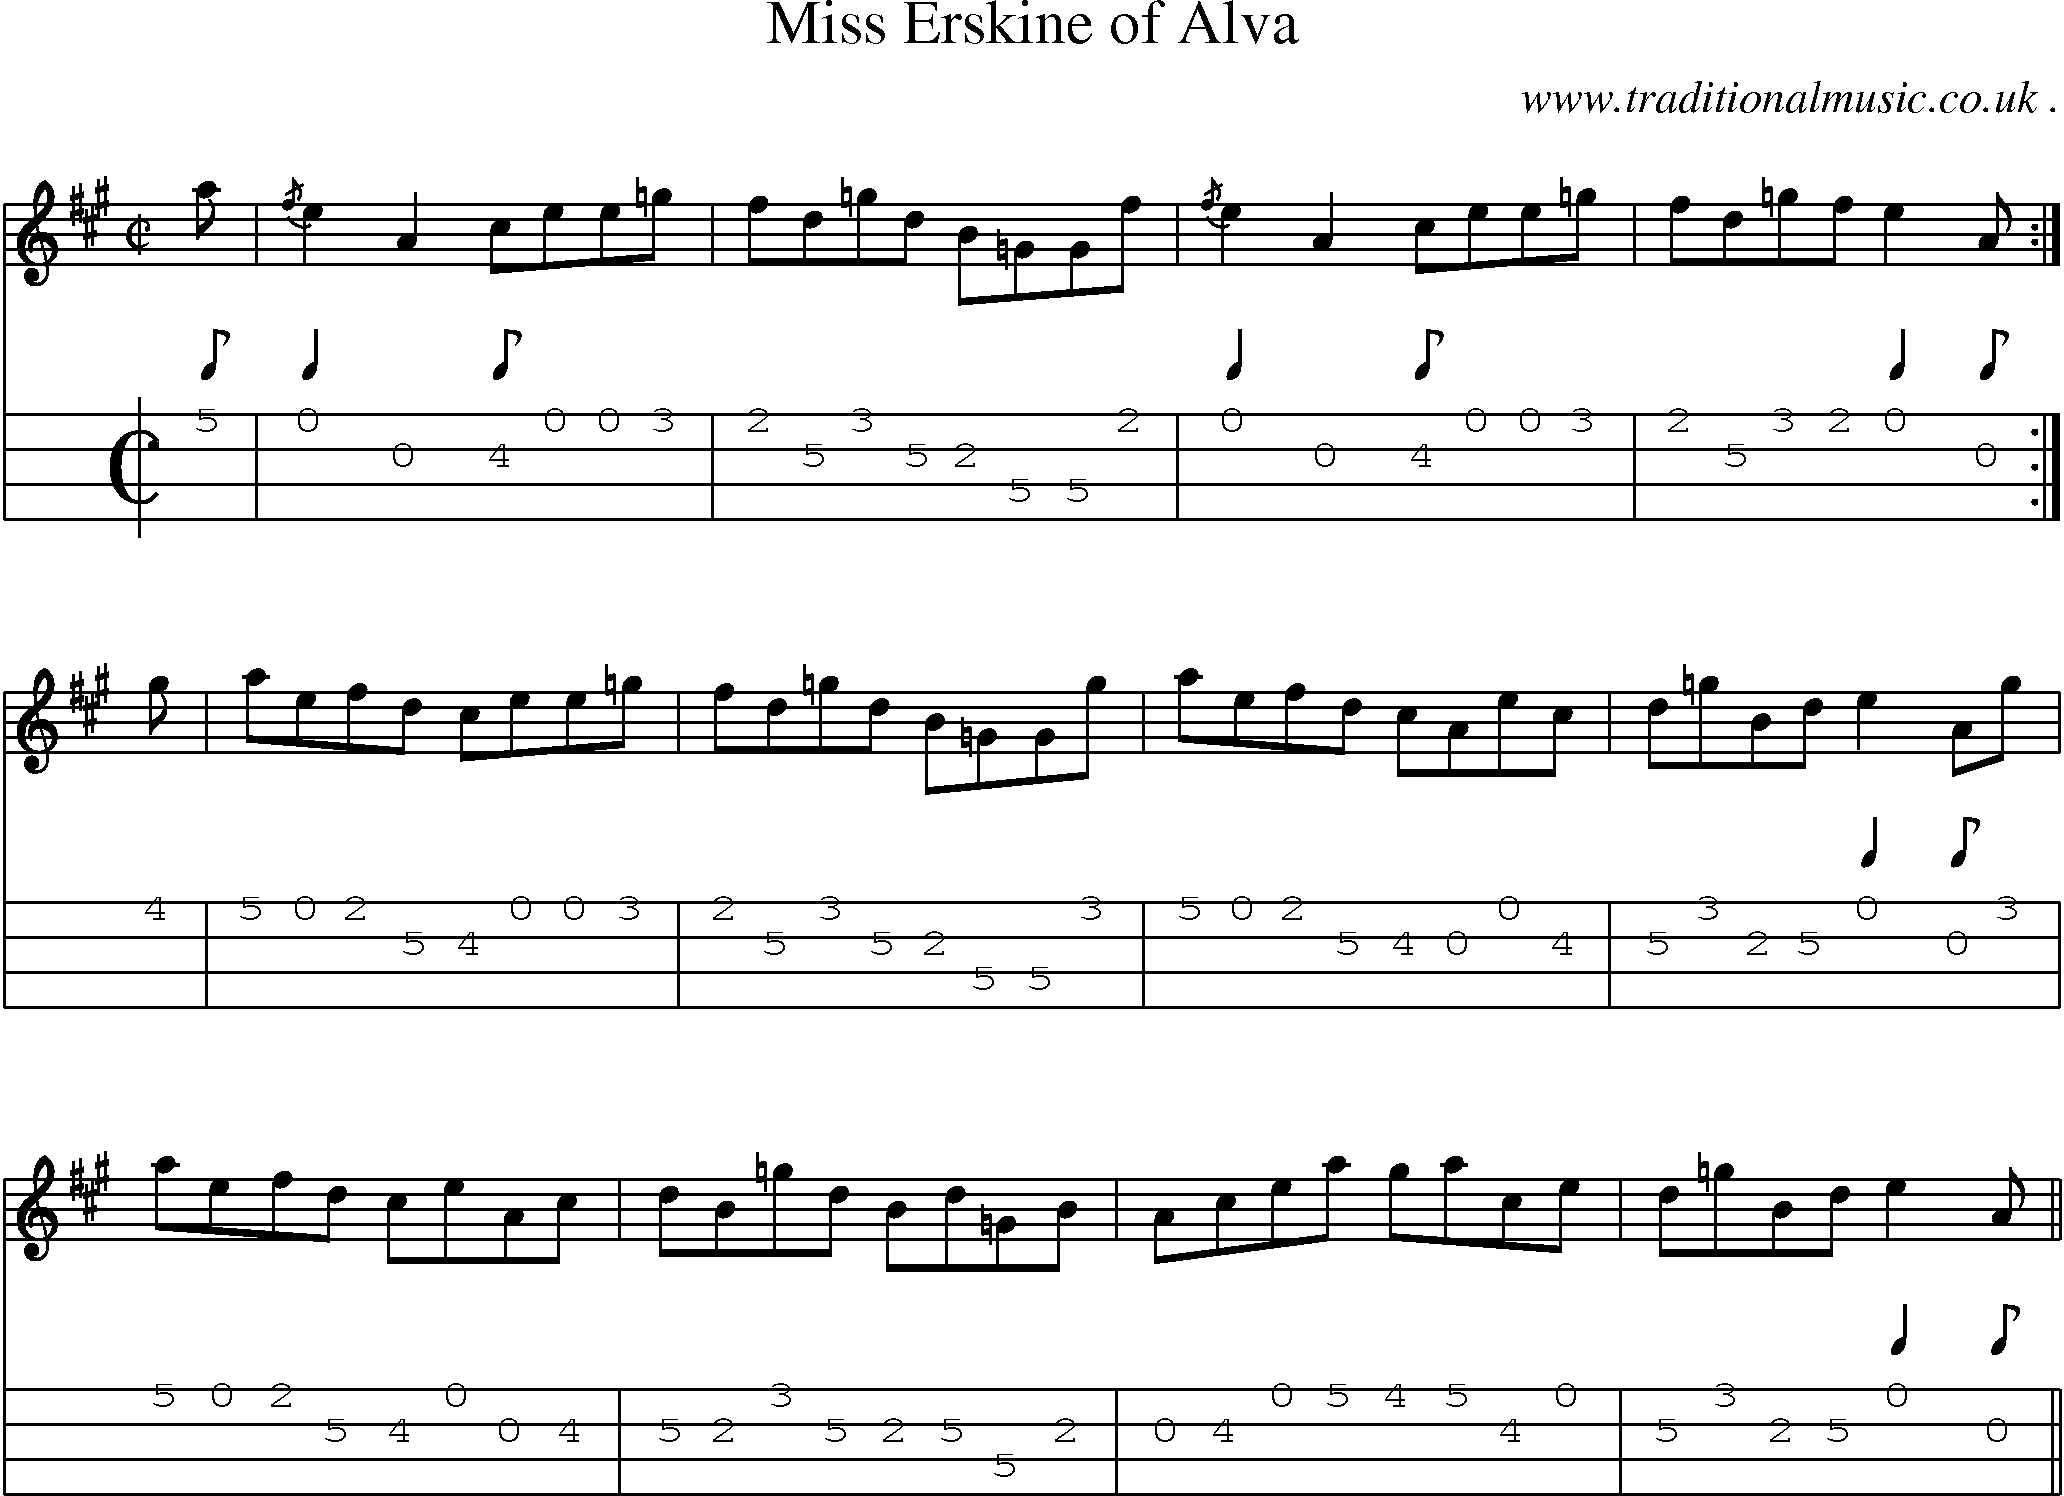 Sheet-music  score, Chords and Mandolin Tabs for Miss Erskine Of Alva